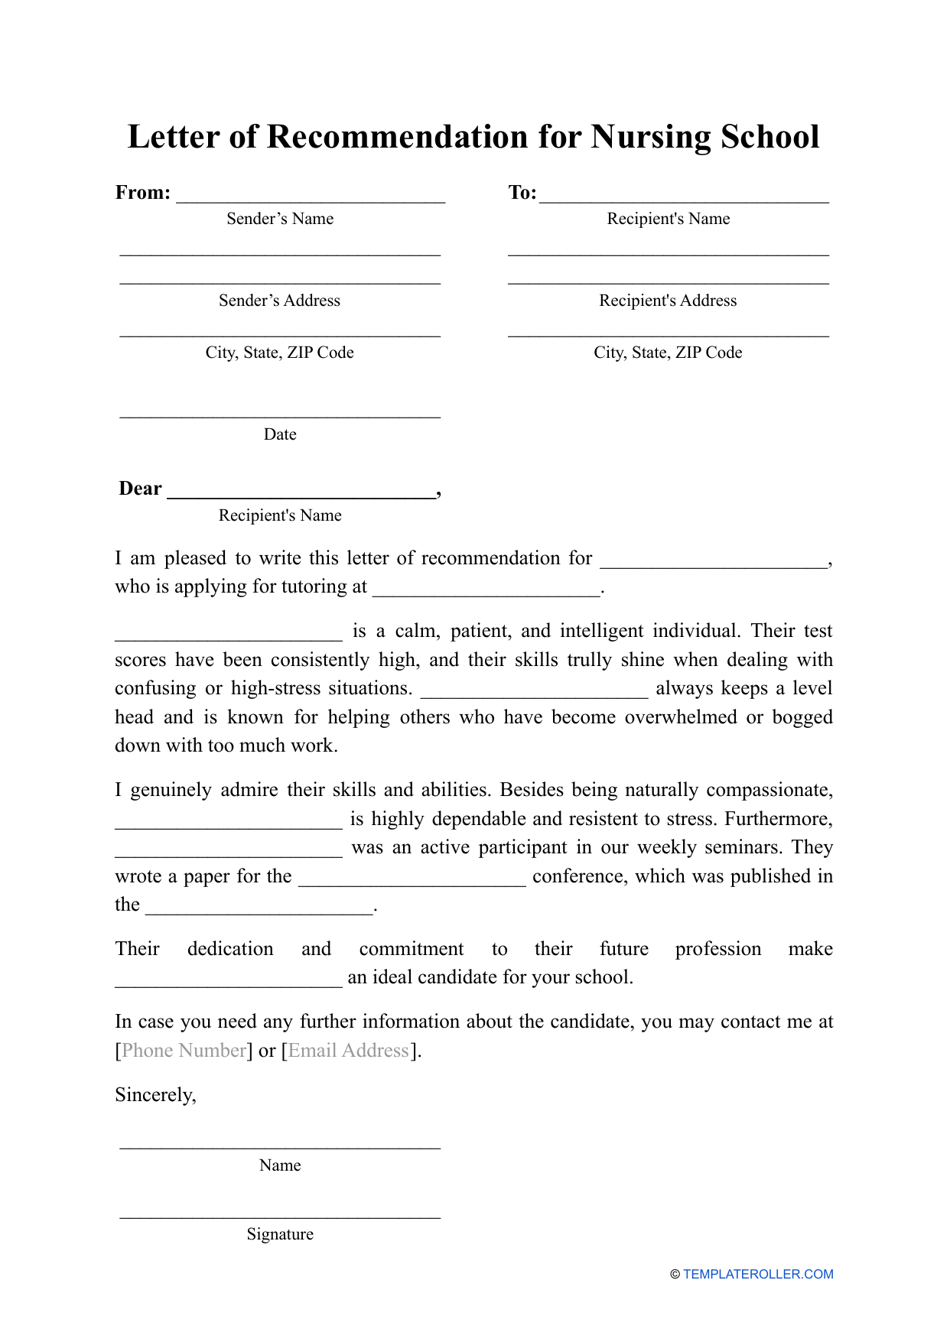 Letter of Recommendation for Nursing School Template